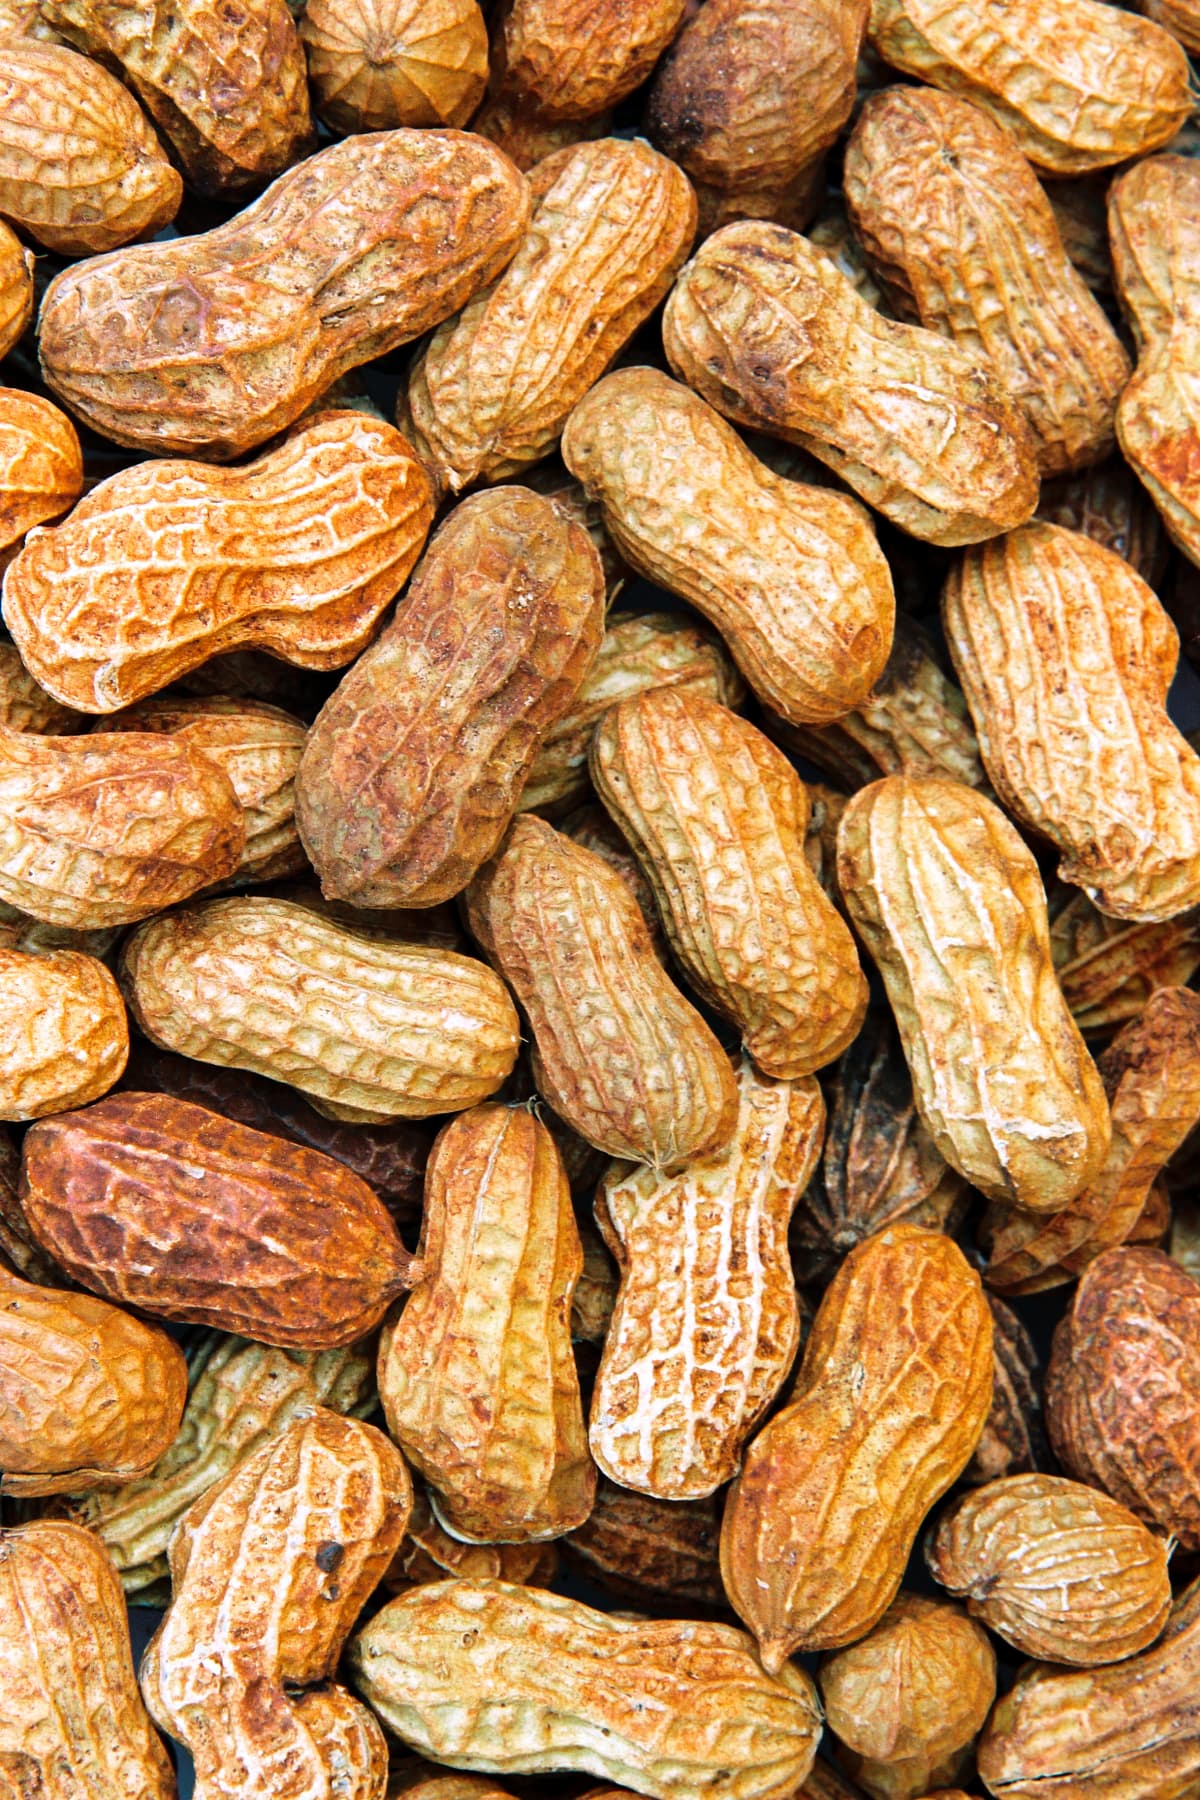 Close-up of roasted peanuts filling the frame